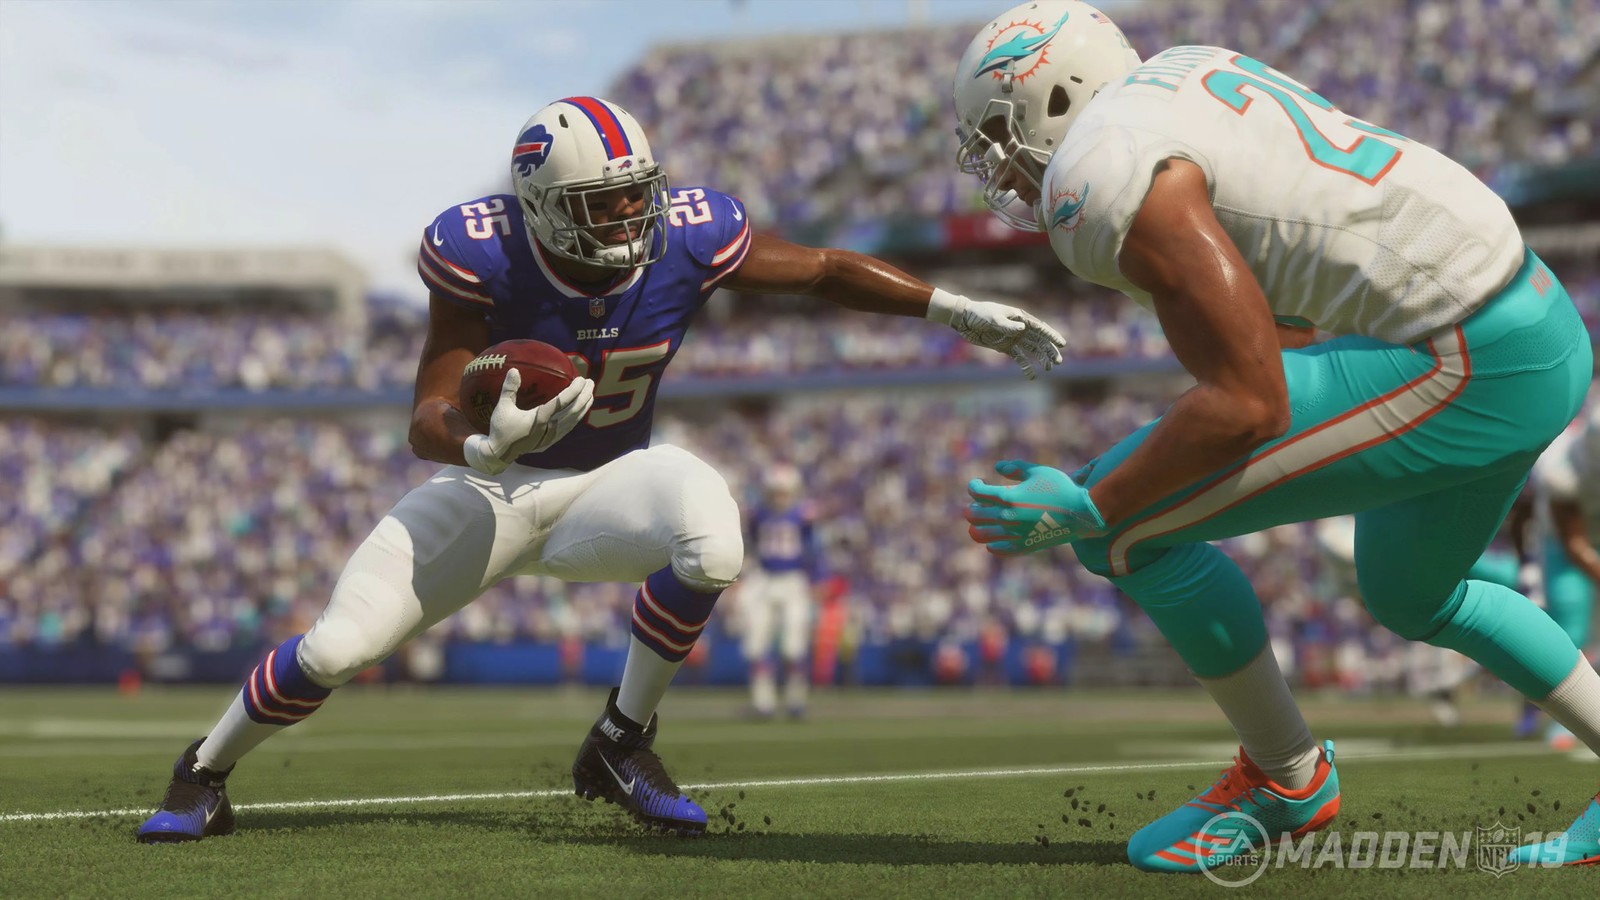 MADDEN NFL 19 [Review]: It Is What It Is.